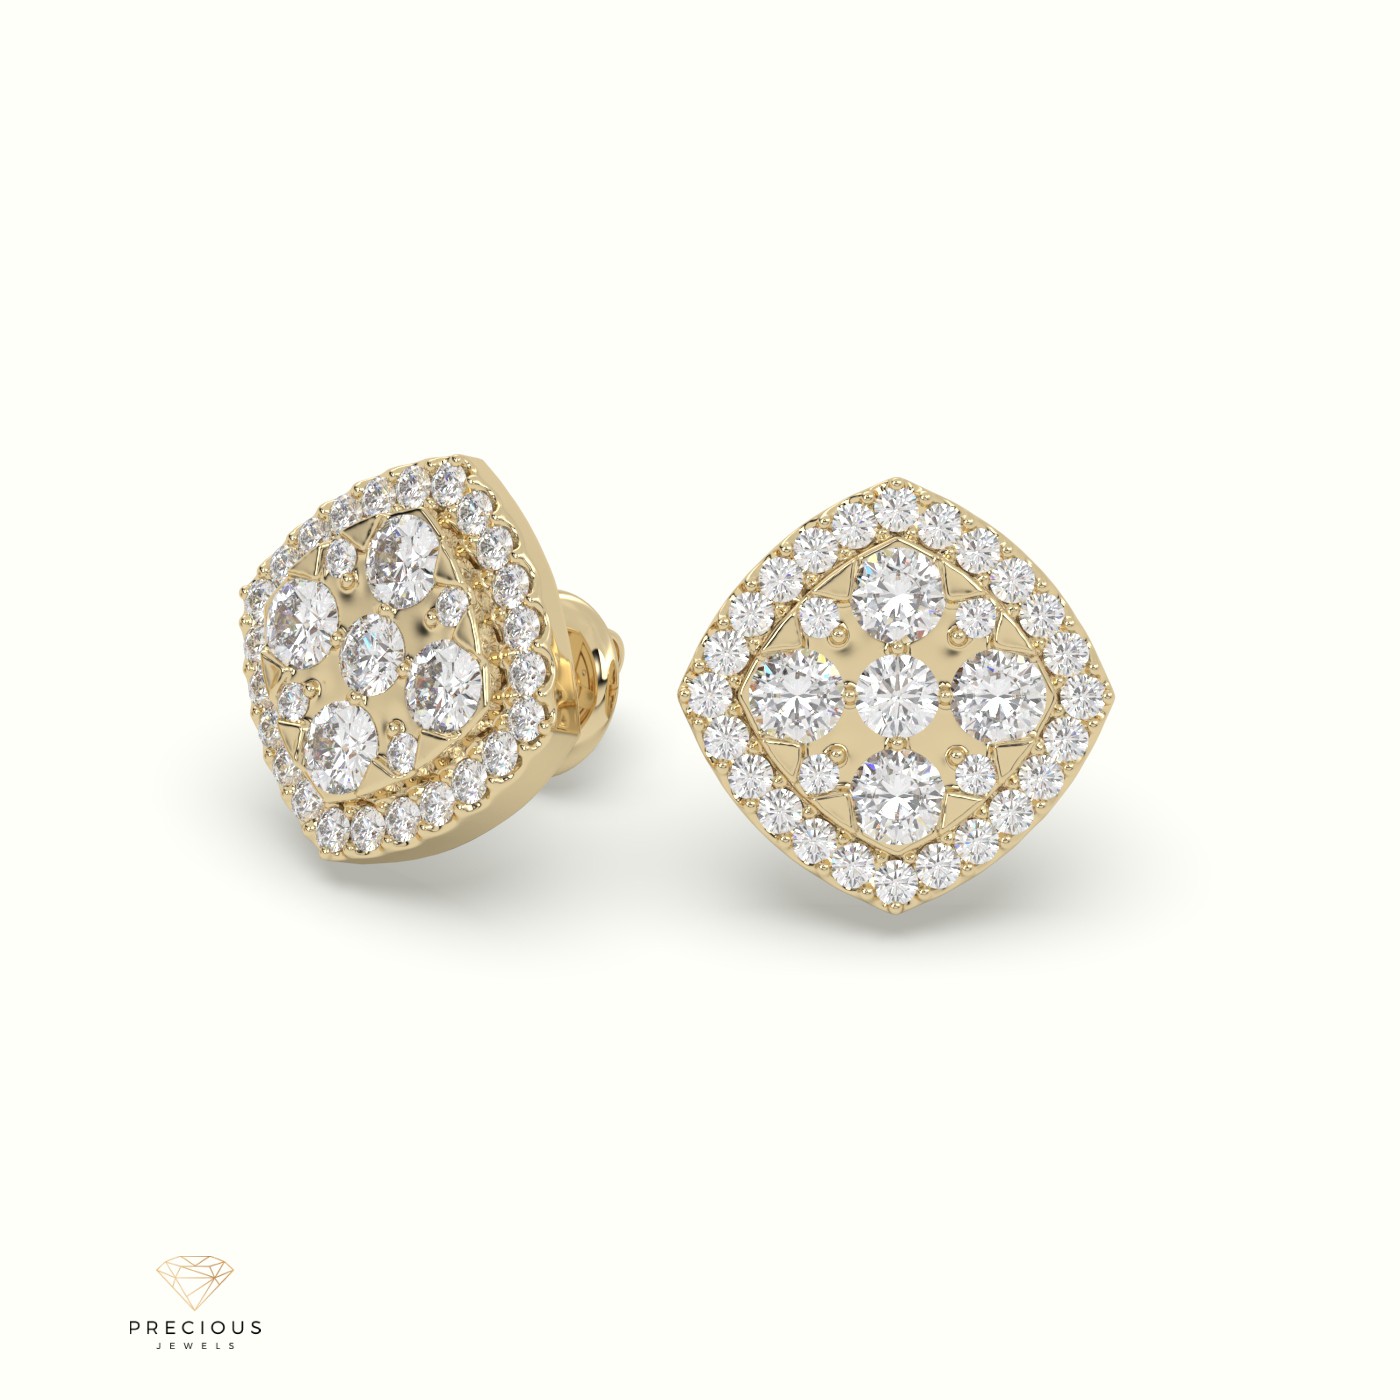 18k yellow gold rounded square diamond cluster earrings